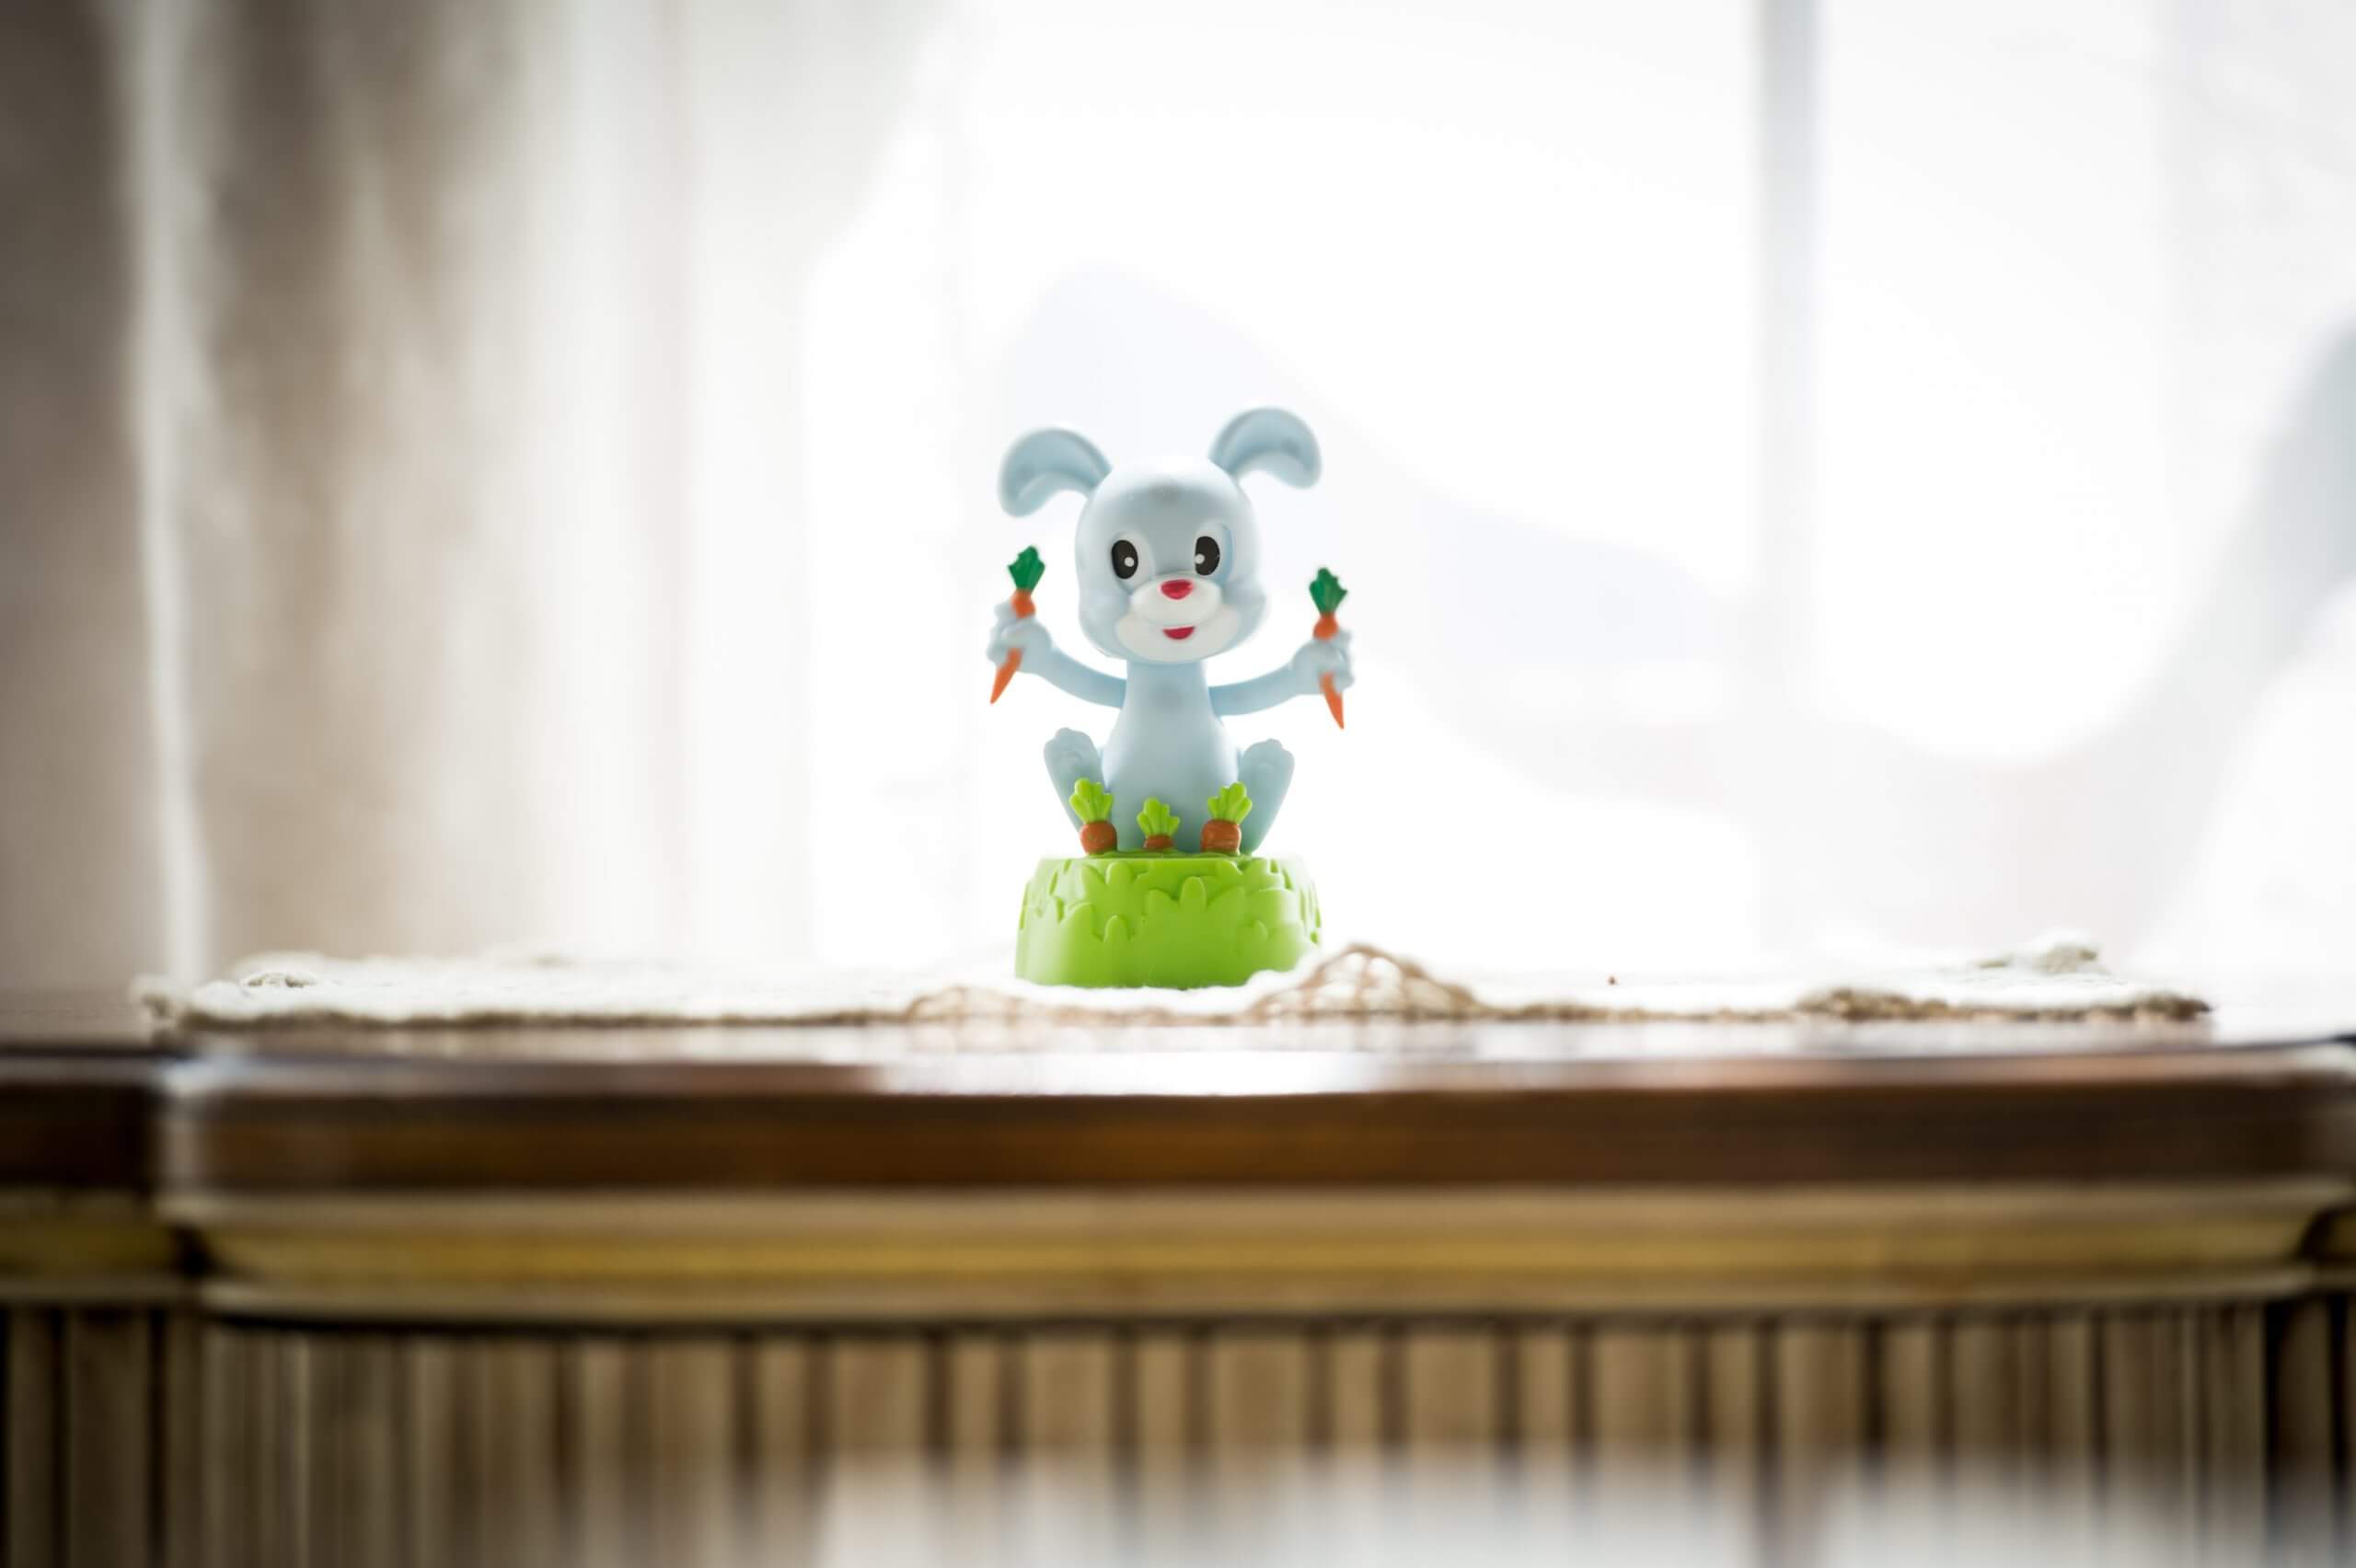 A smiling toy rabbit sits on a window sill. The rabbit moves from side to side, a carrot held out in both paws.